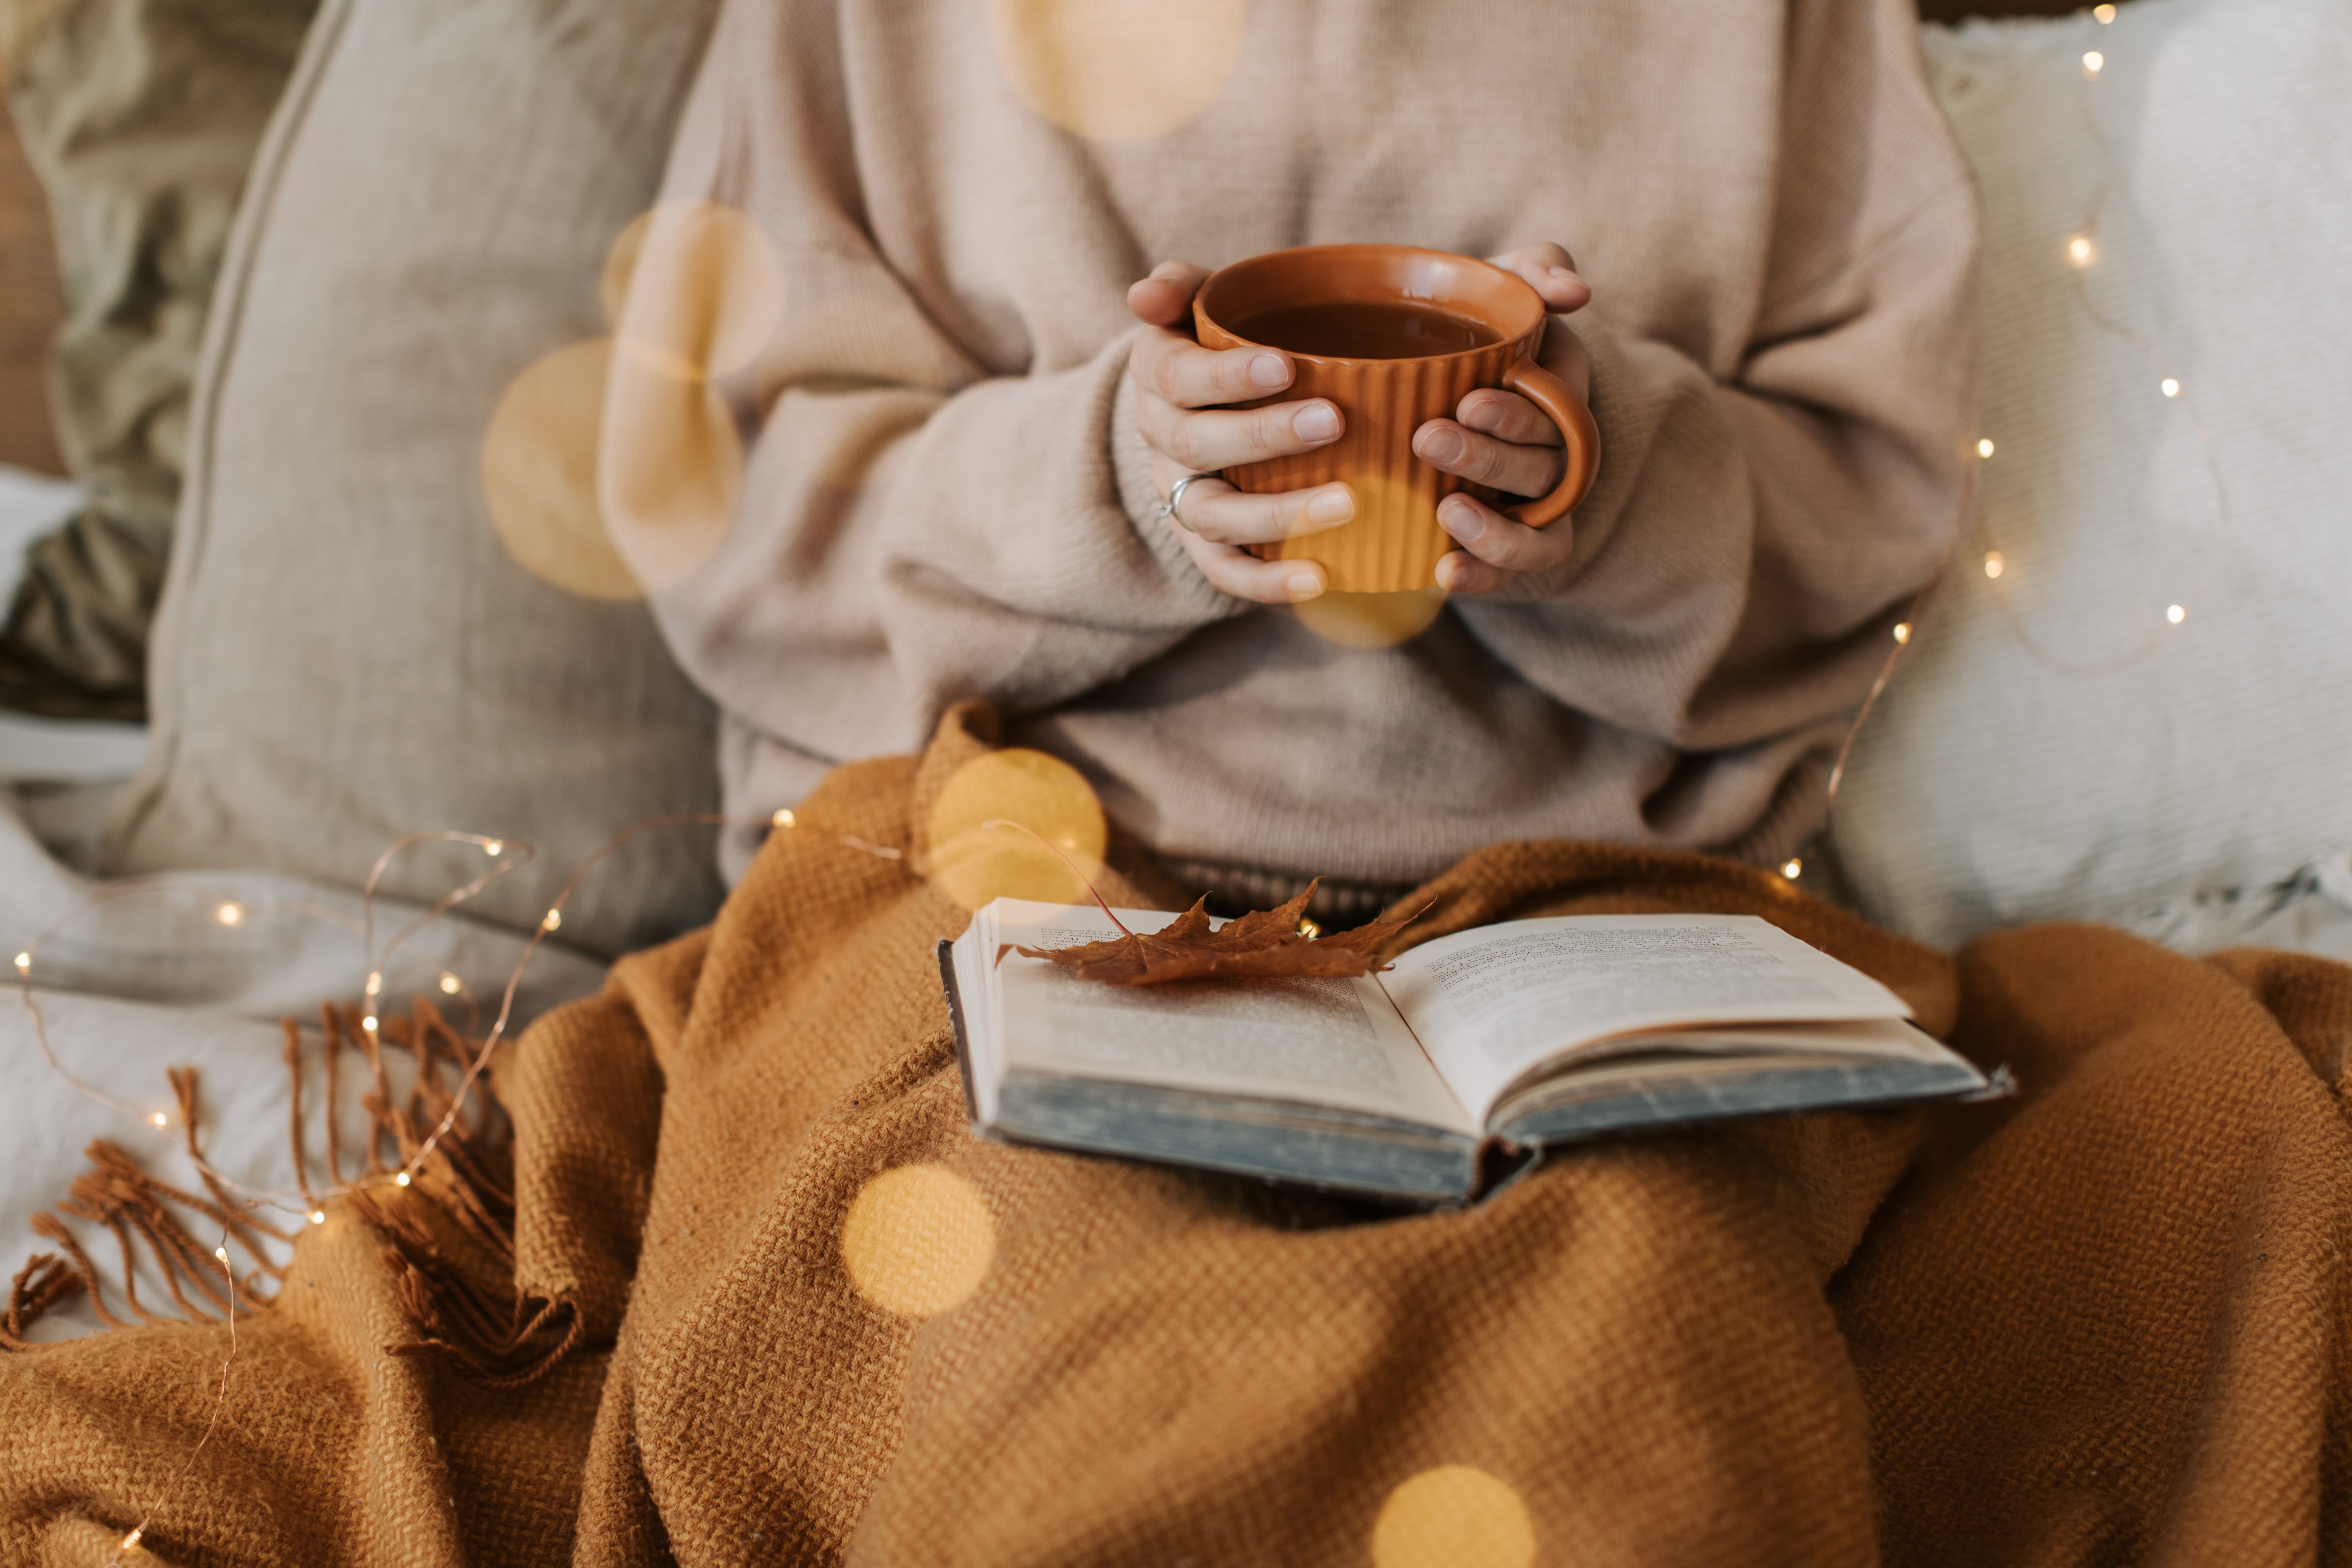 Photo by Vlada Karpovich: https://www.pexels.com/photo/person-in-beige-sweater-holding-a-cup-of-warm-beverage-9969149/